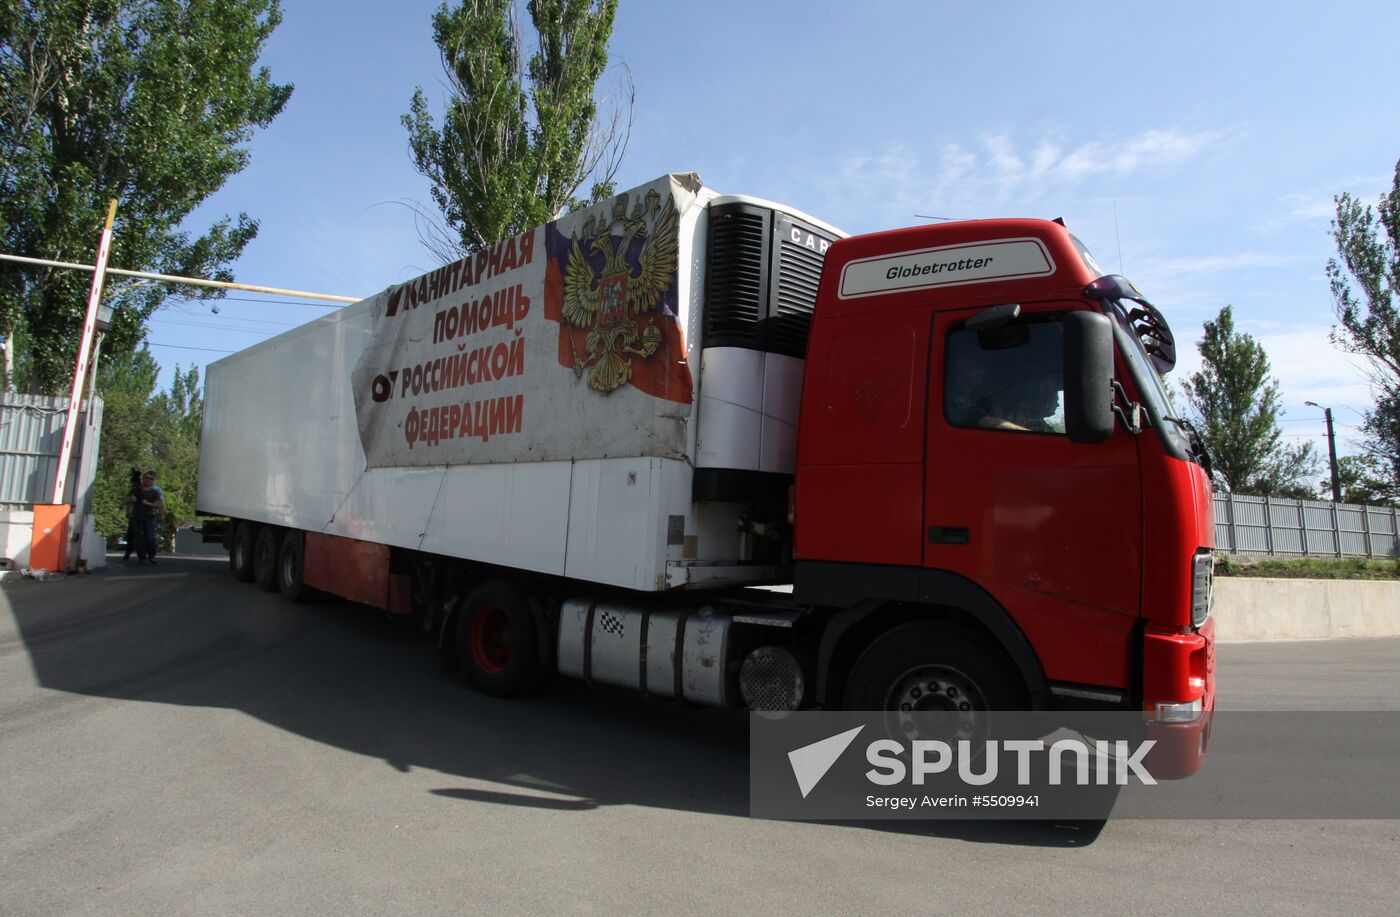 Russian humanitarian convoy arrives in Donetsk